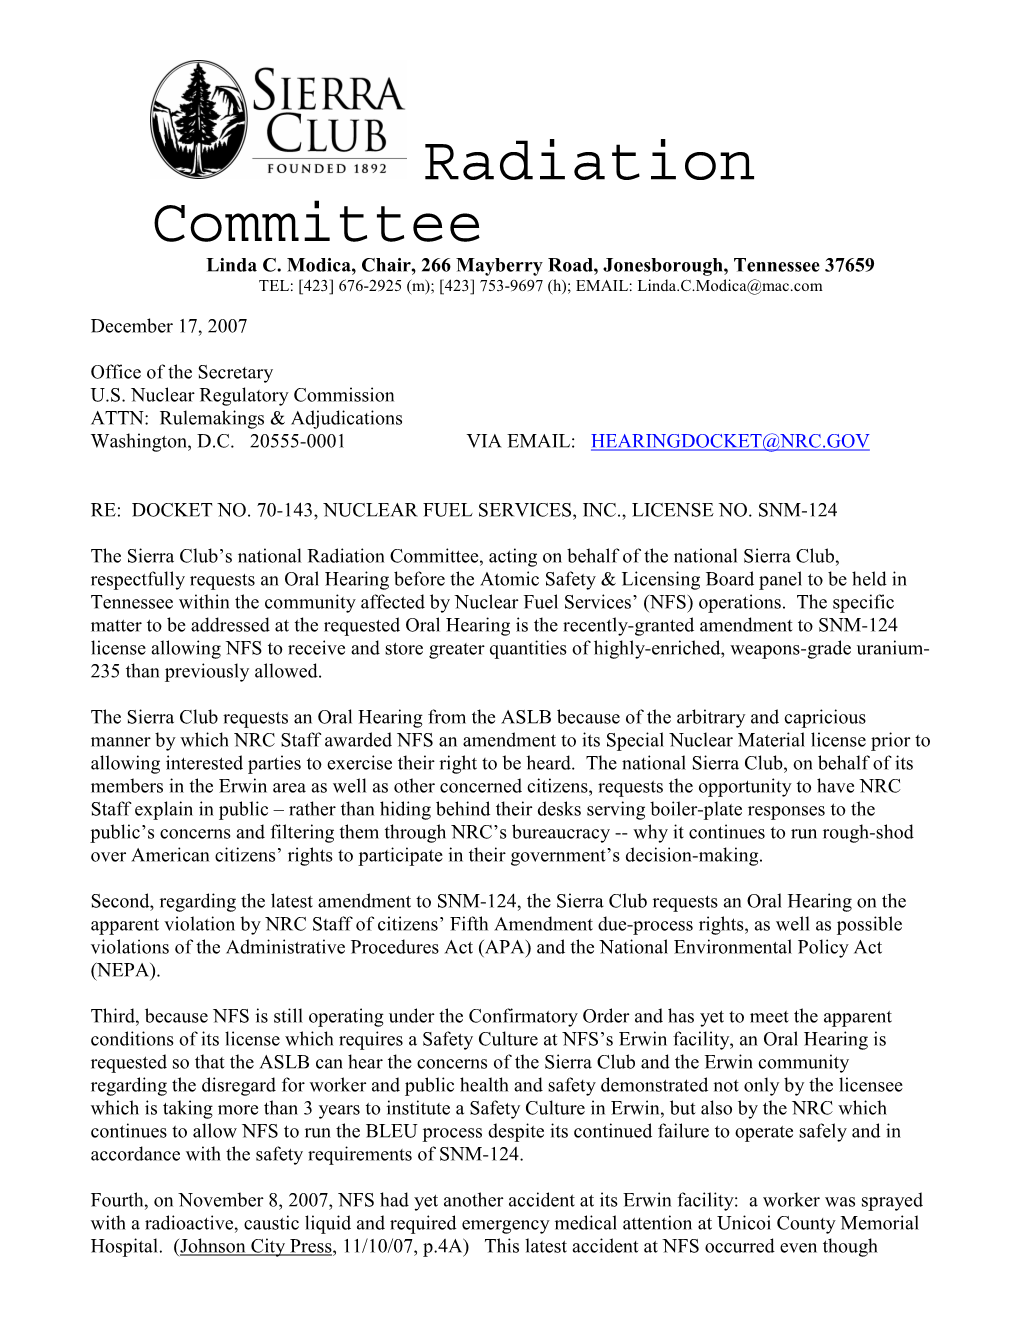 2007/12/17-Hearing Request of Linda Cataldo Modica on Behalf of the Sierra Club Radiation Committee Re Amendment to SNM-124 Lice